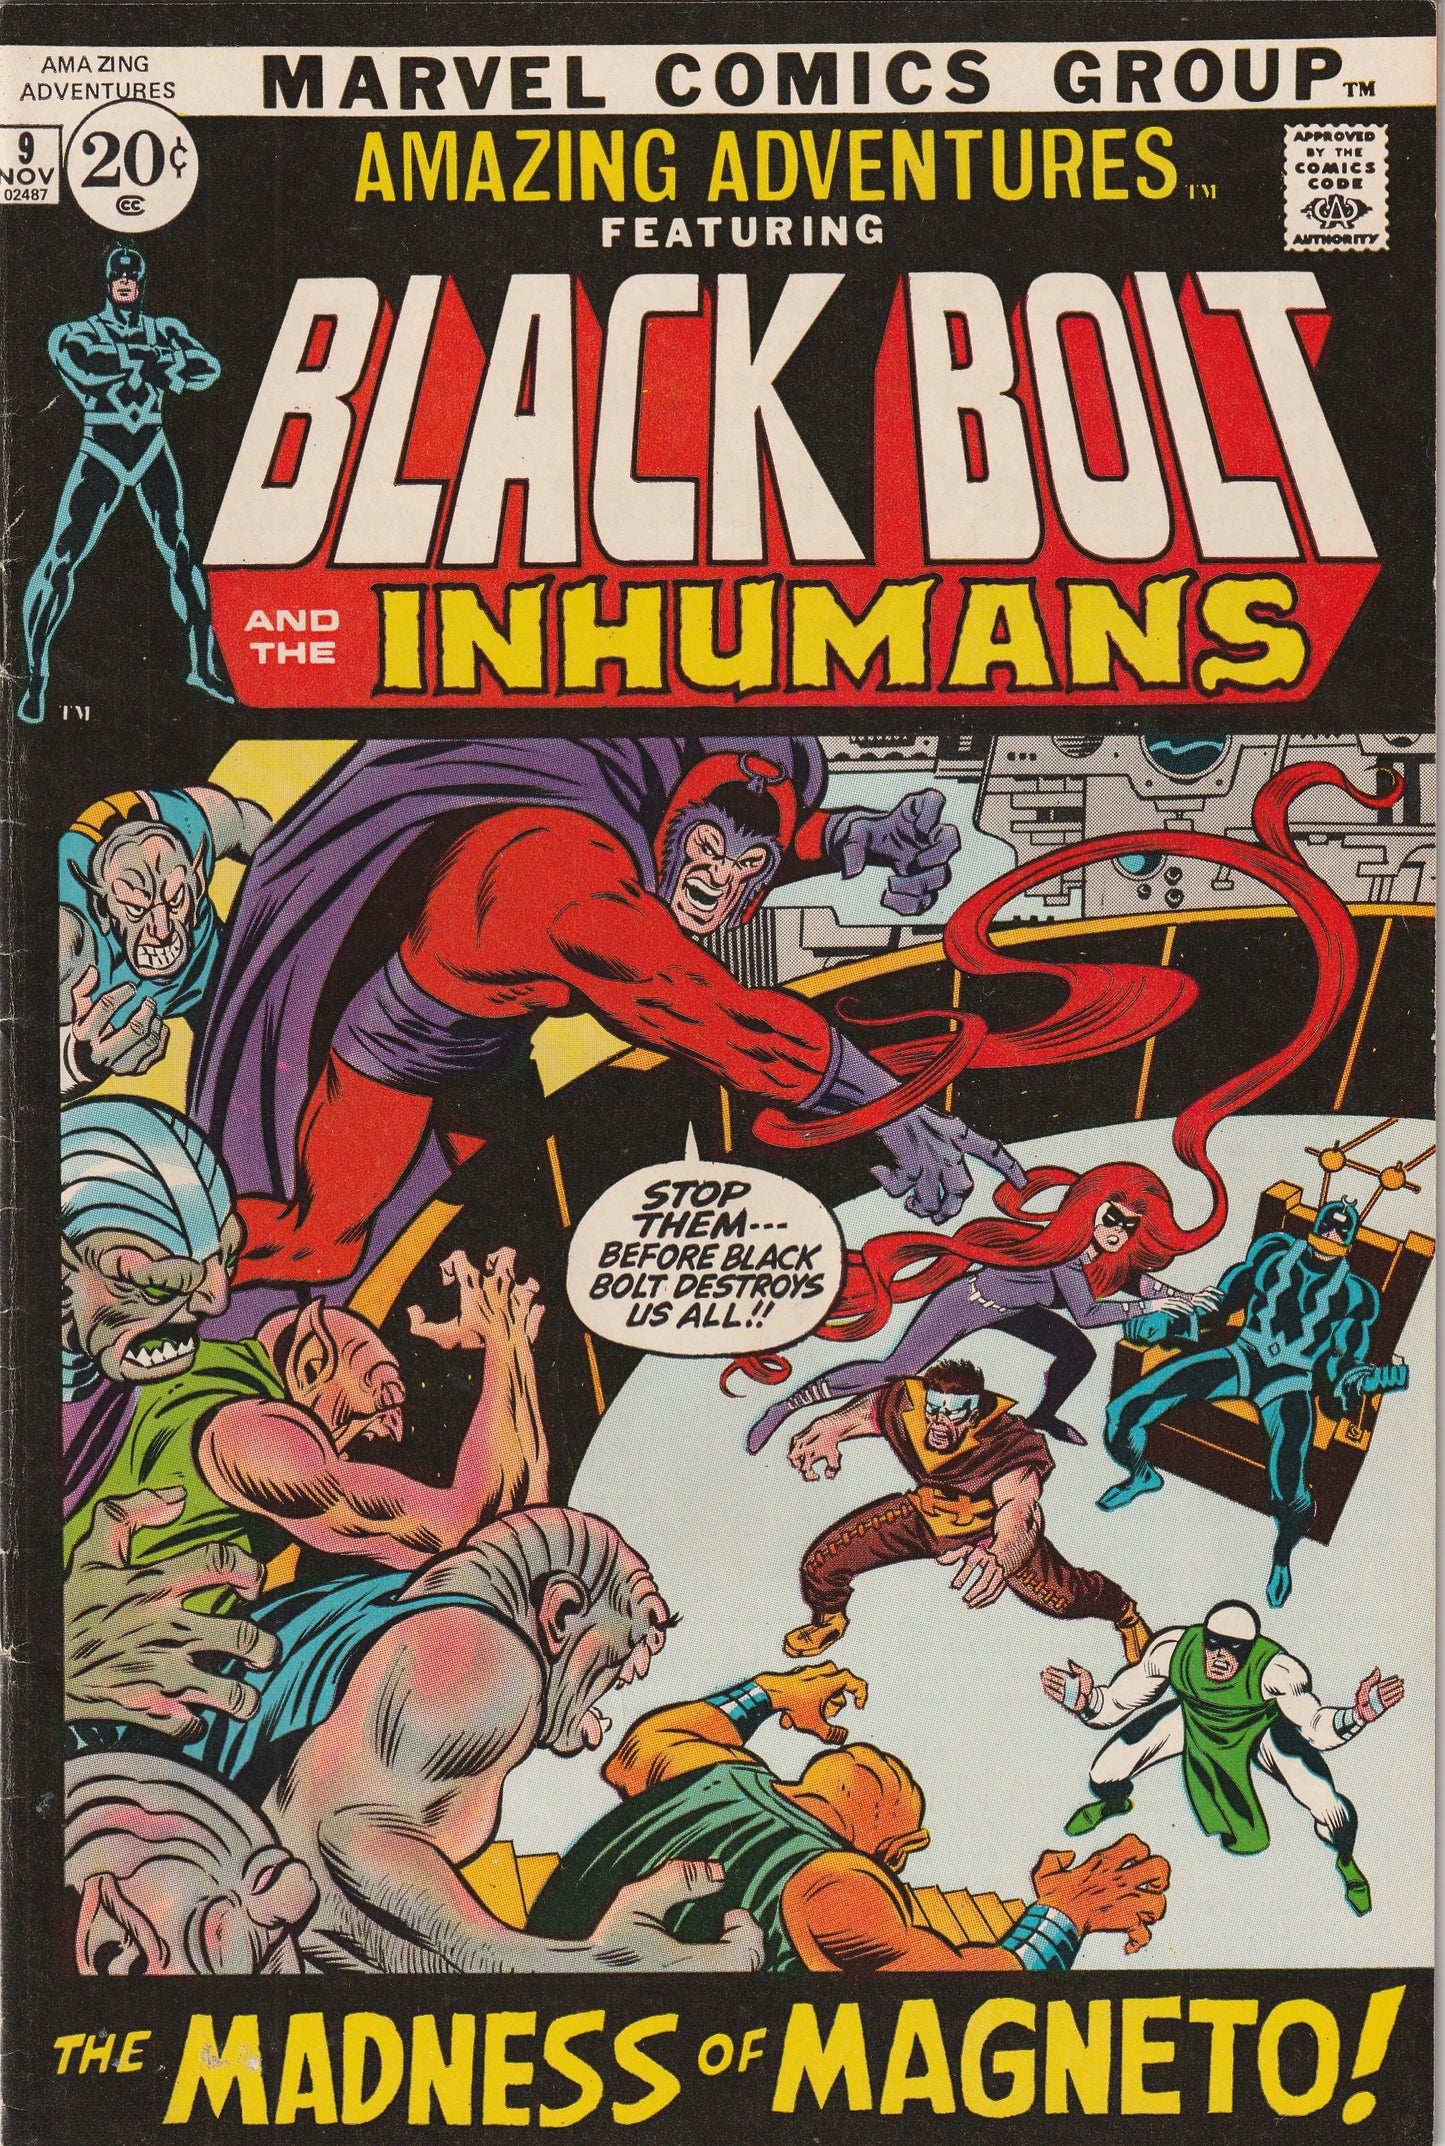 Amazing Adventures #9 (1971) - Featuring Black Bolt and The Inhumans